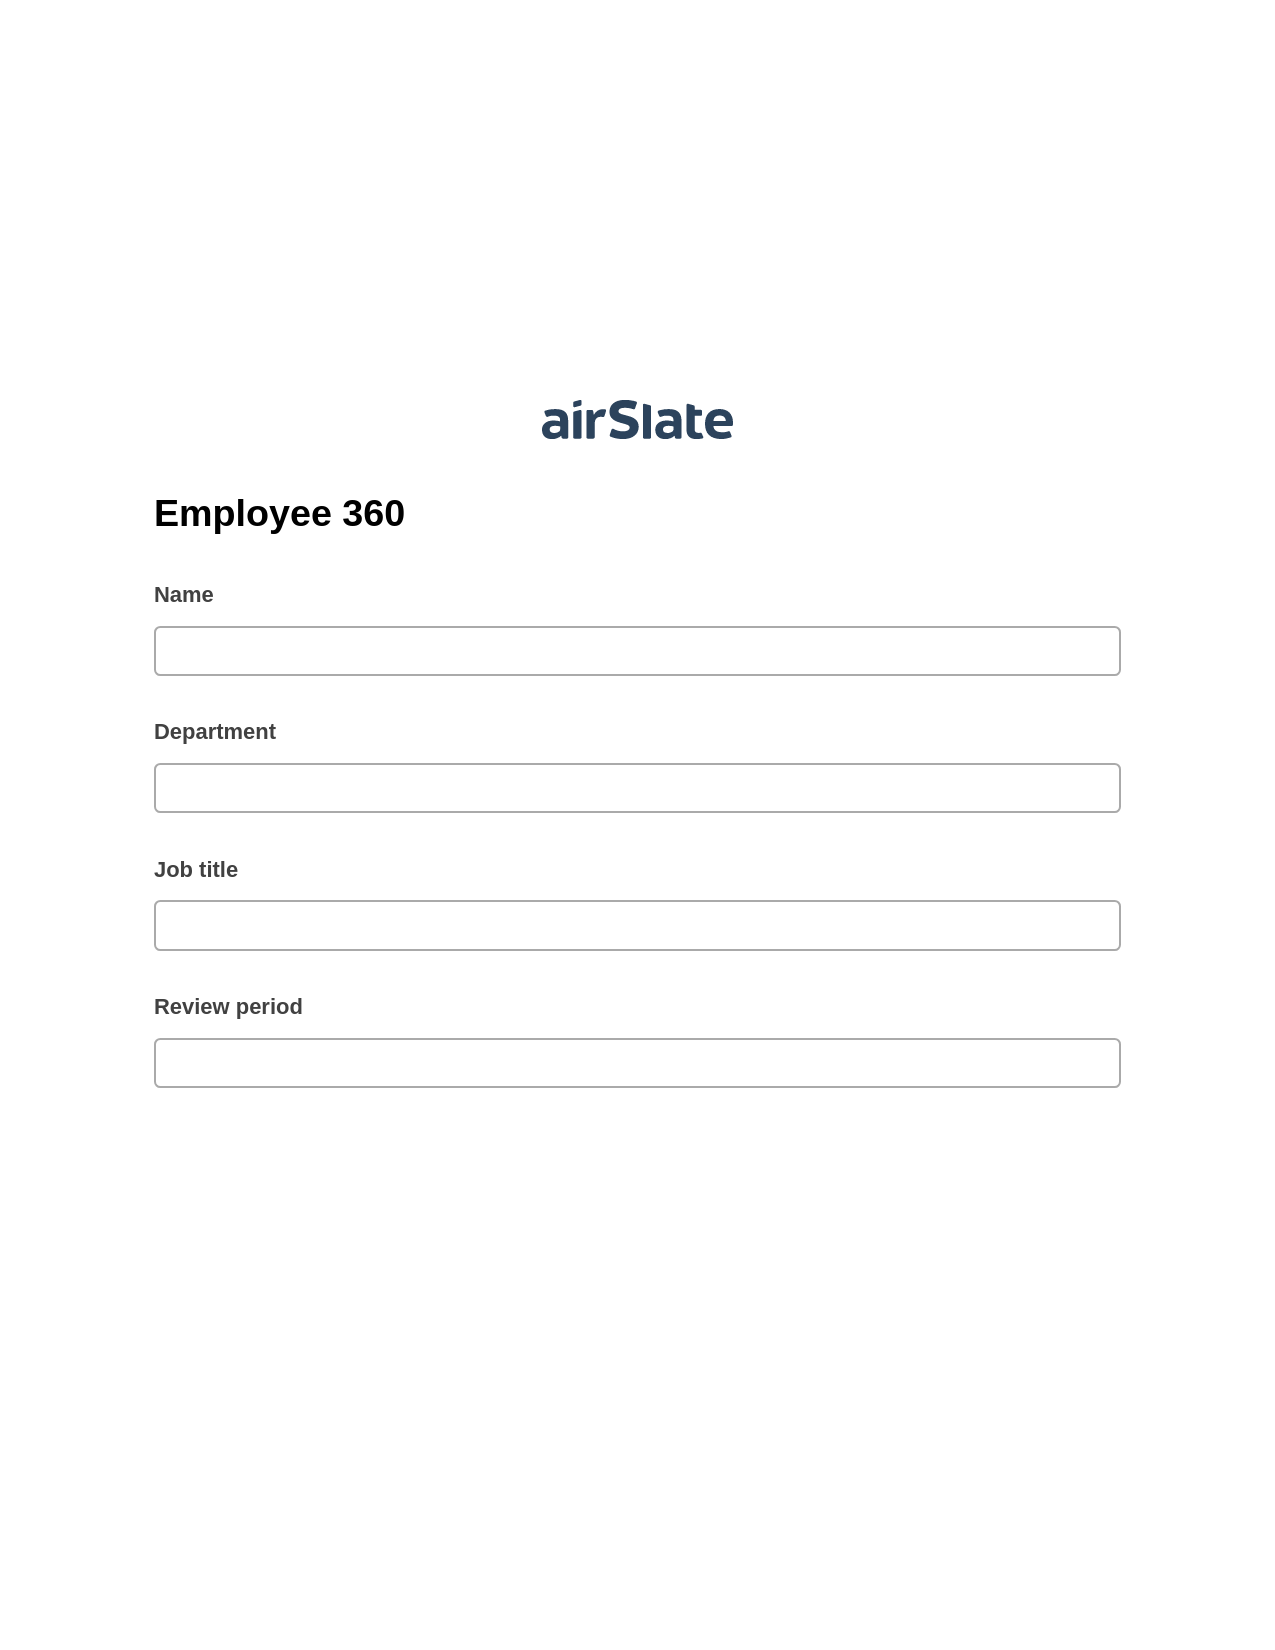 Employee 360 Pre-fill from MS Dynamics 365 Records, Create MS Dynamics 365 Records Bot, Export to WebMerge Bot